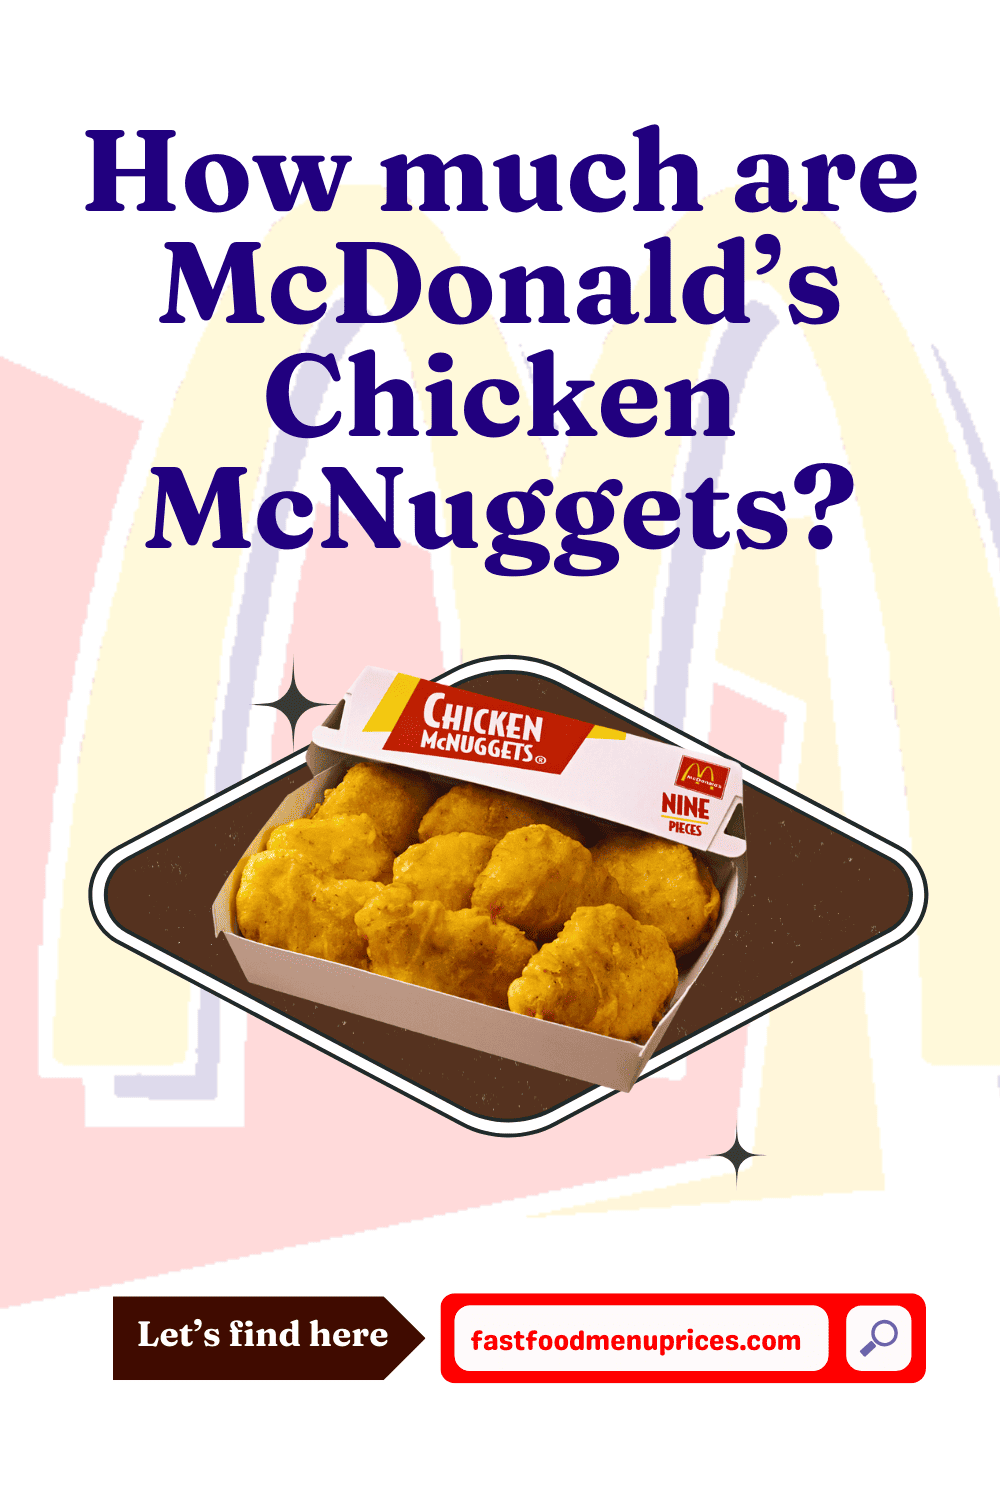 How much are McDonald's chicken McNuggets on the raising cane's secret menu?